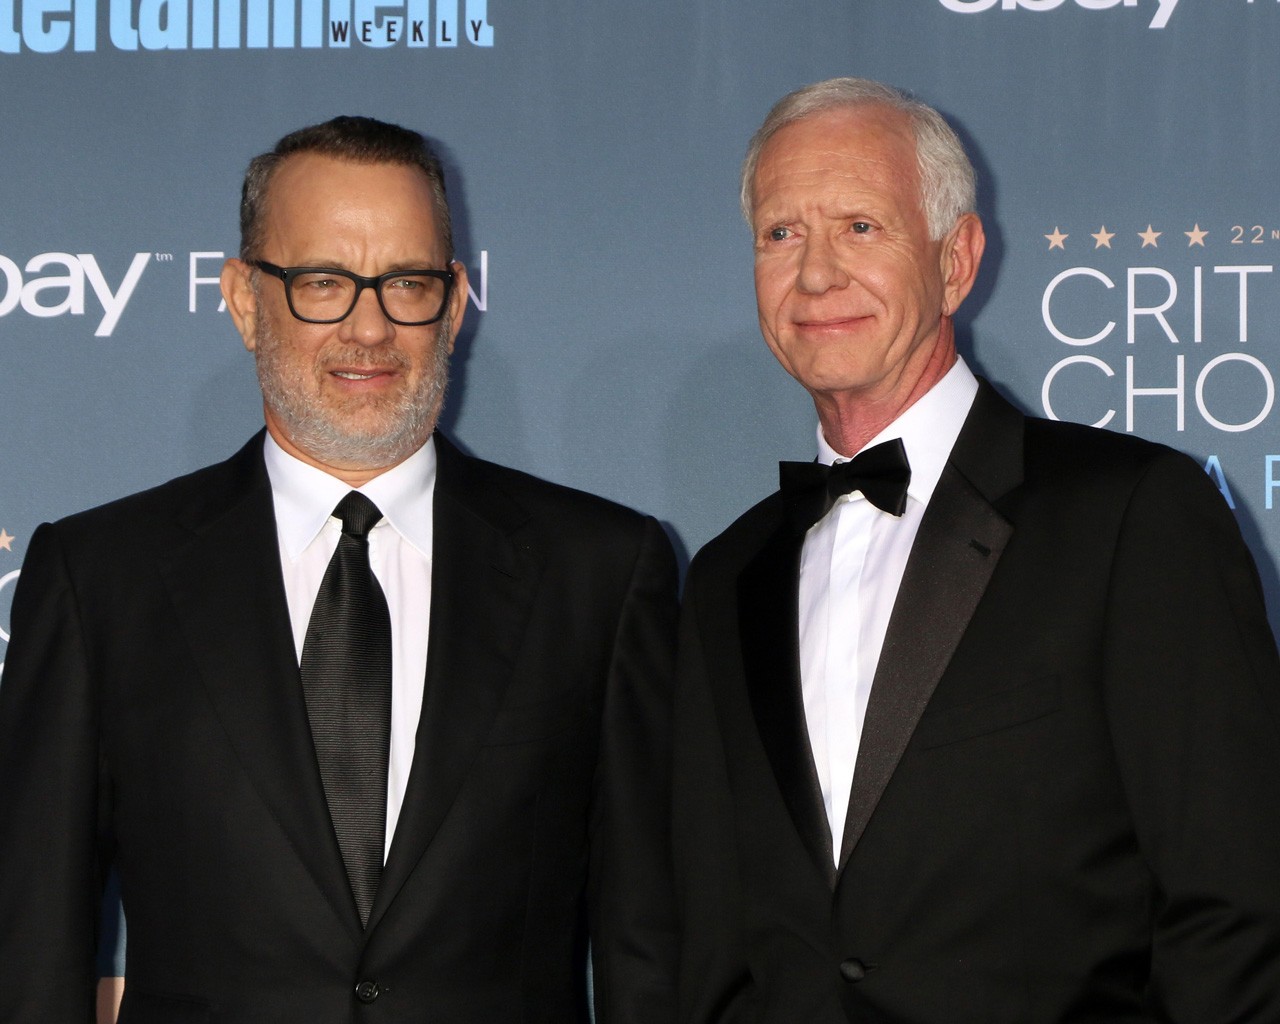 Tom Hanks and Chesley “Sully” Sullenberger